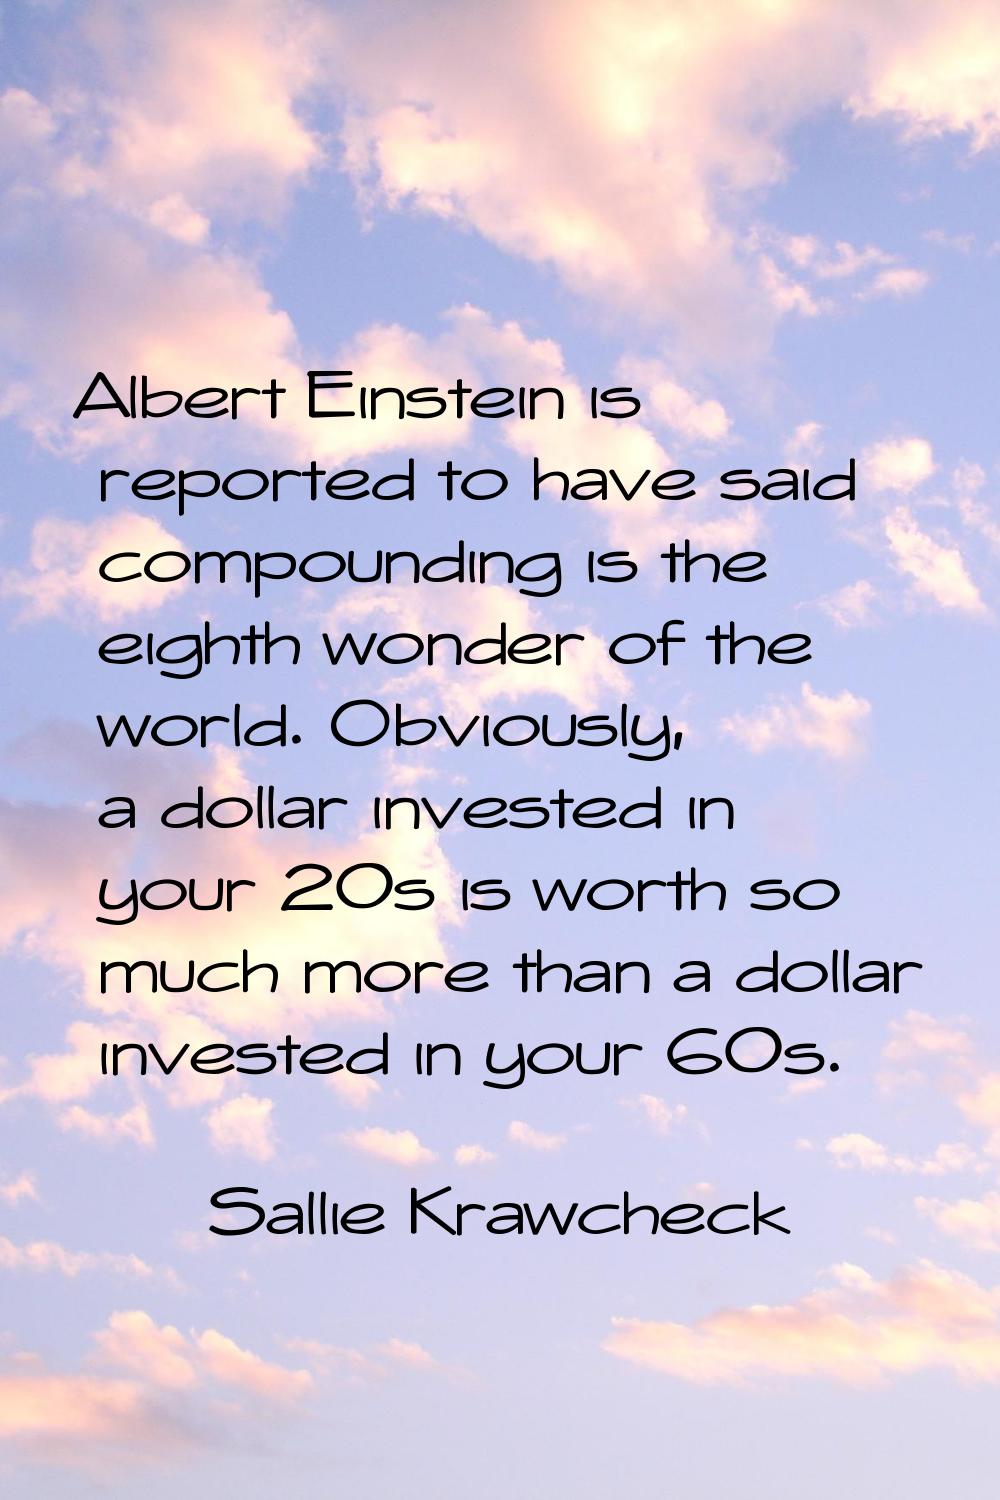 Albert Einstein is reported to have said compounding is the eighth wonder of the world. Obviously, 